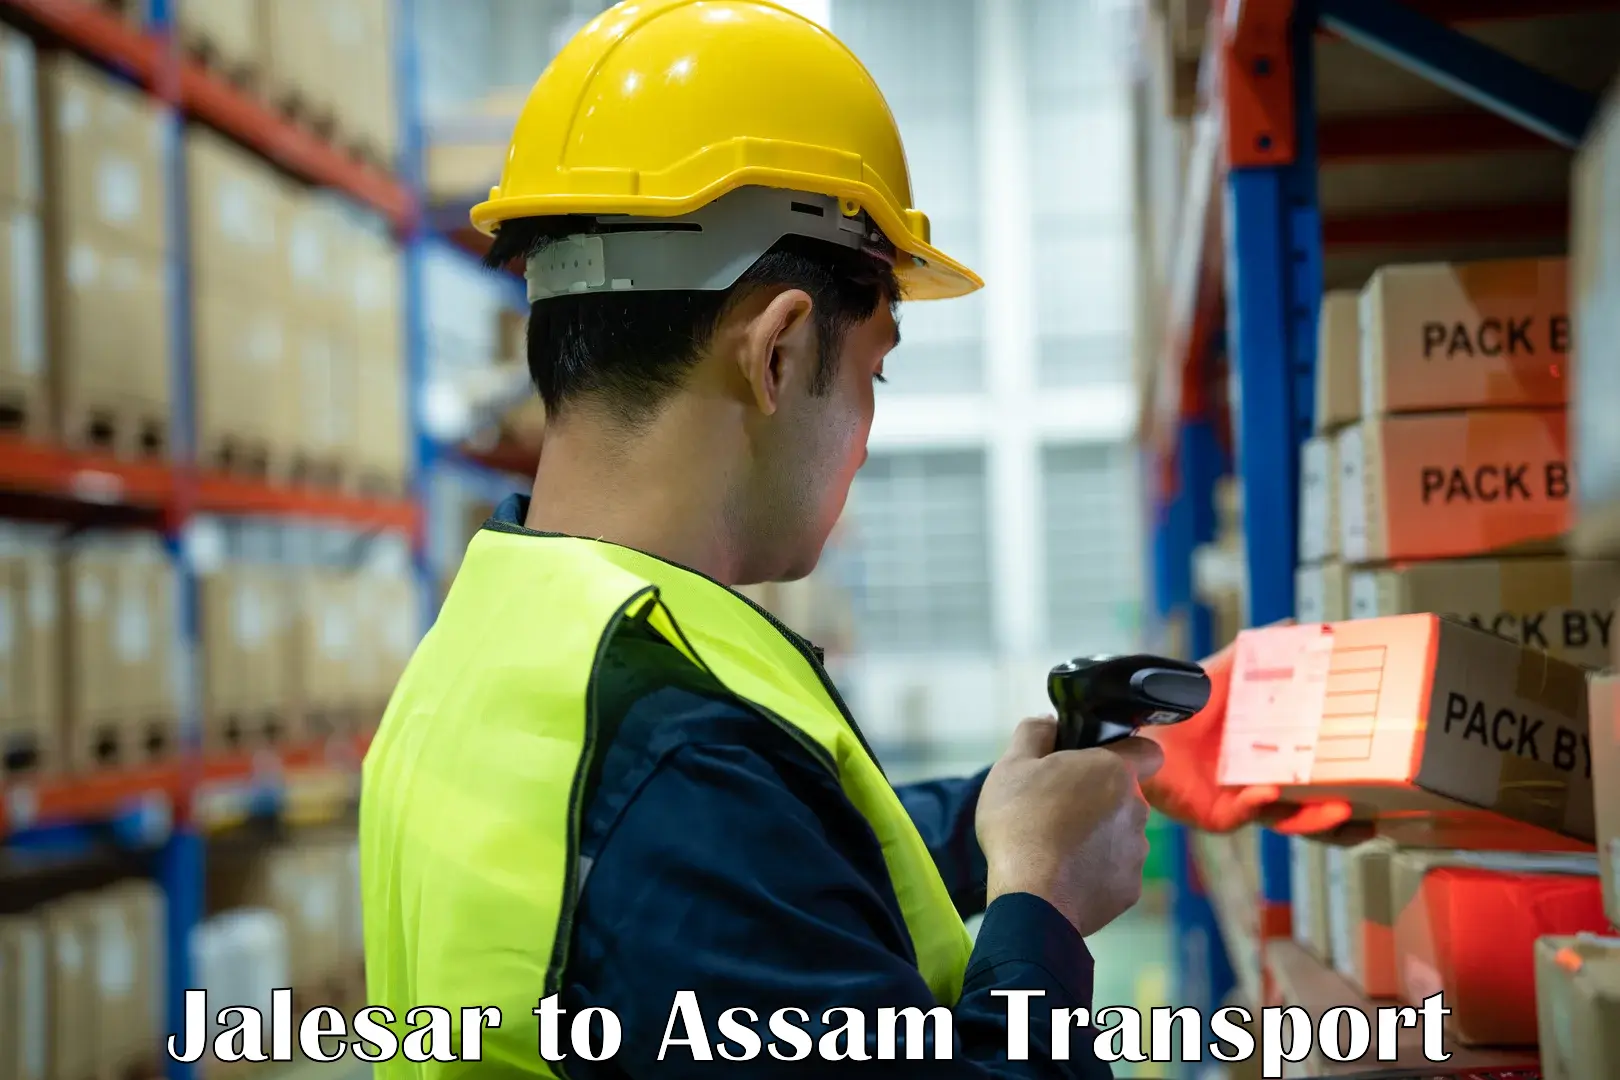 Container transport service Jalesar to Lala Assam